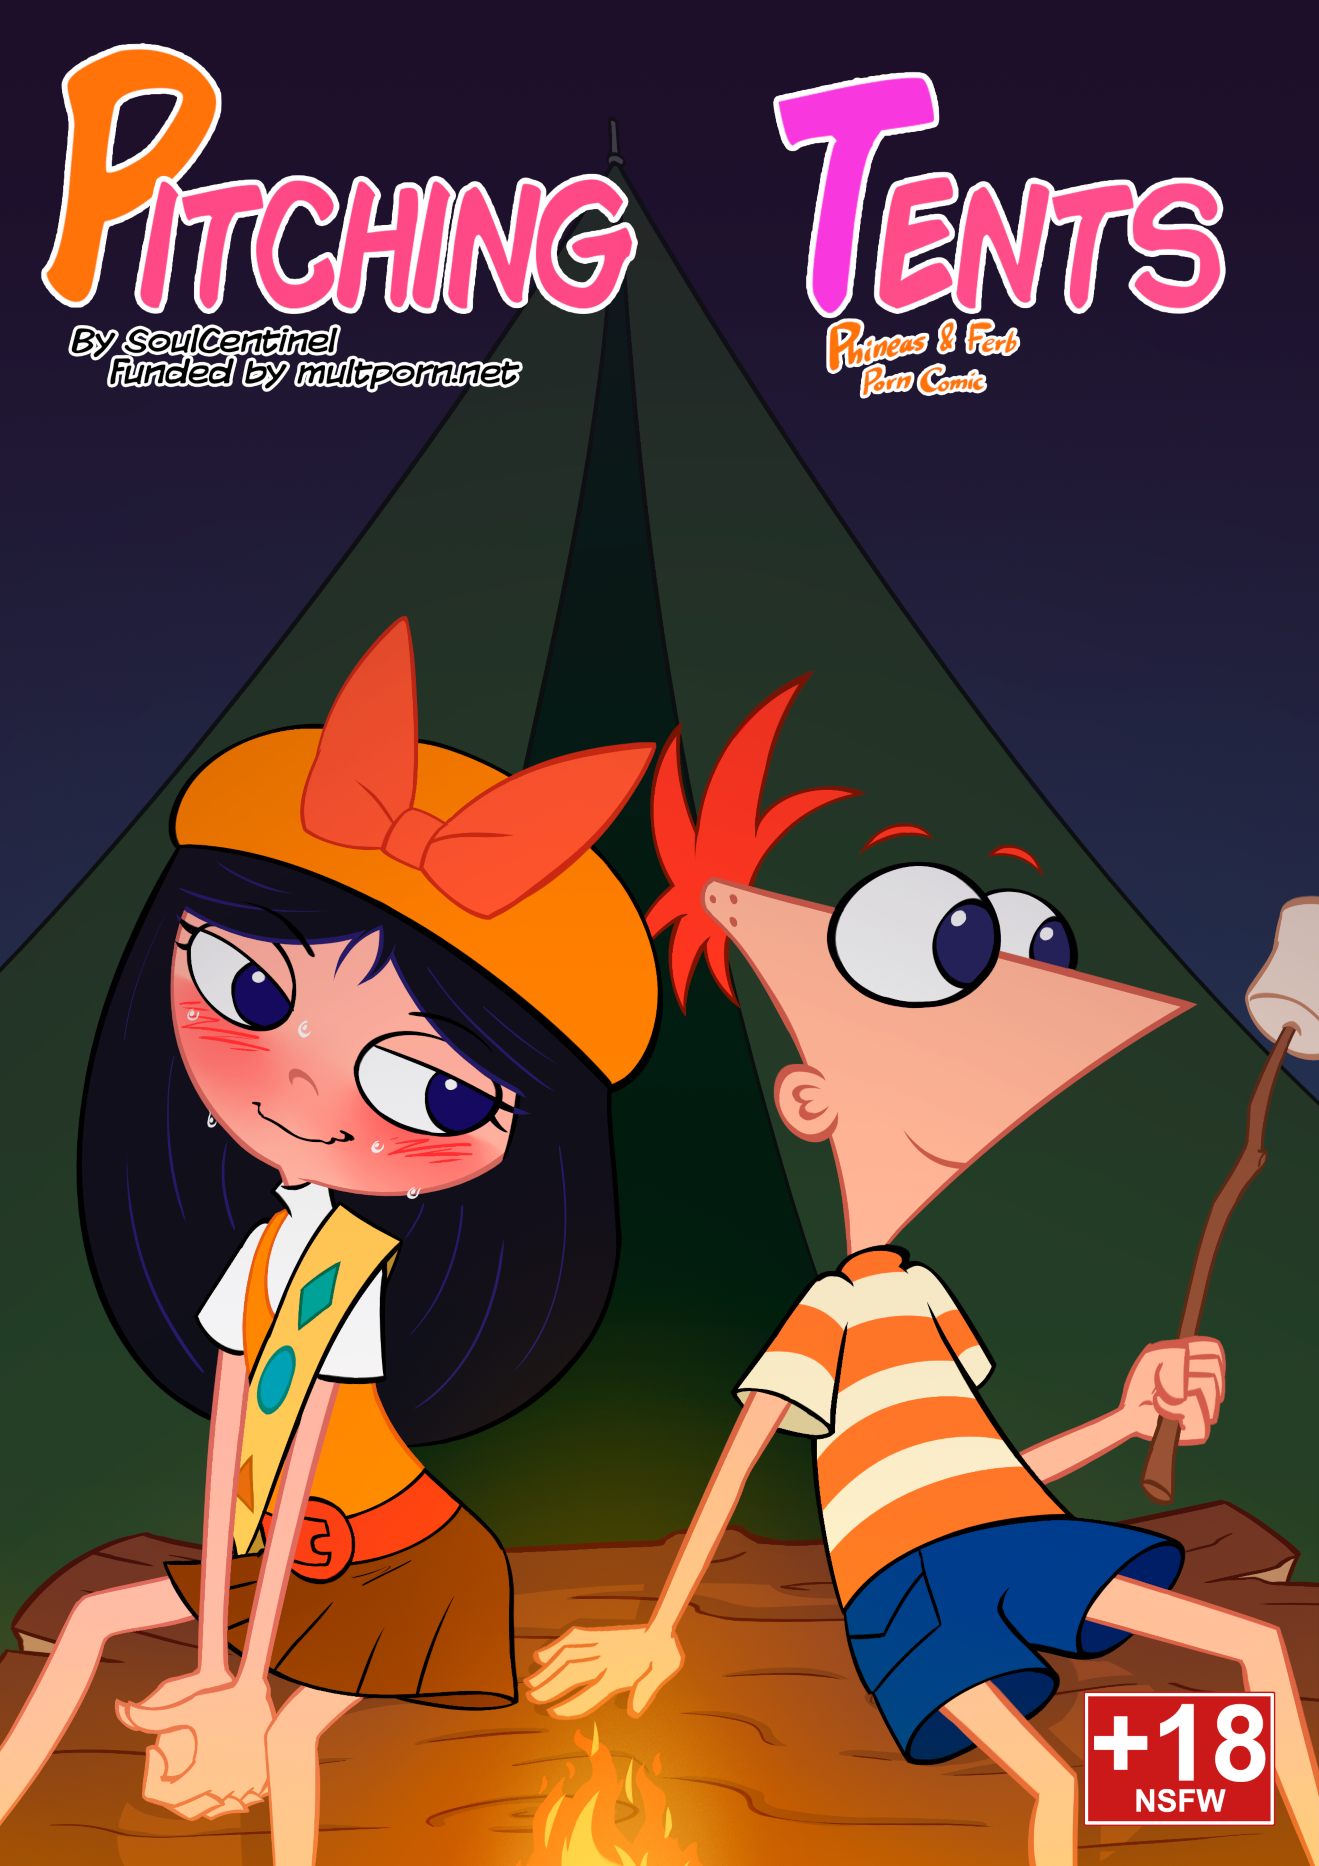 Phineas And Ferb Futanari Porn - Pitching Tents - Phineas and Ferb [SoulCentinel] - FreeAdultComix